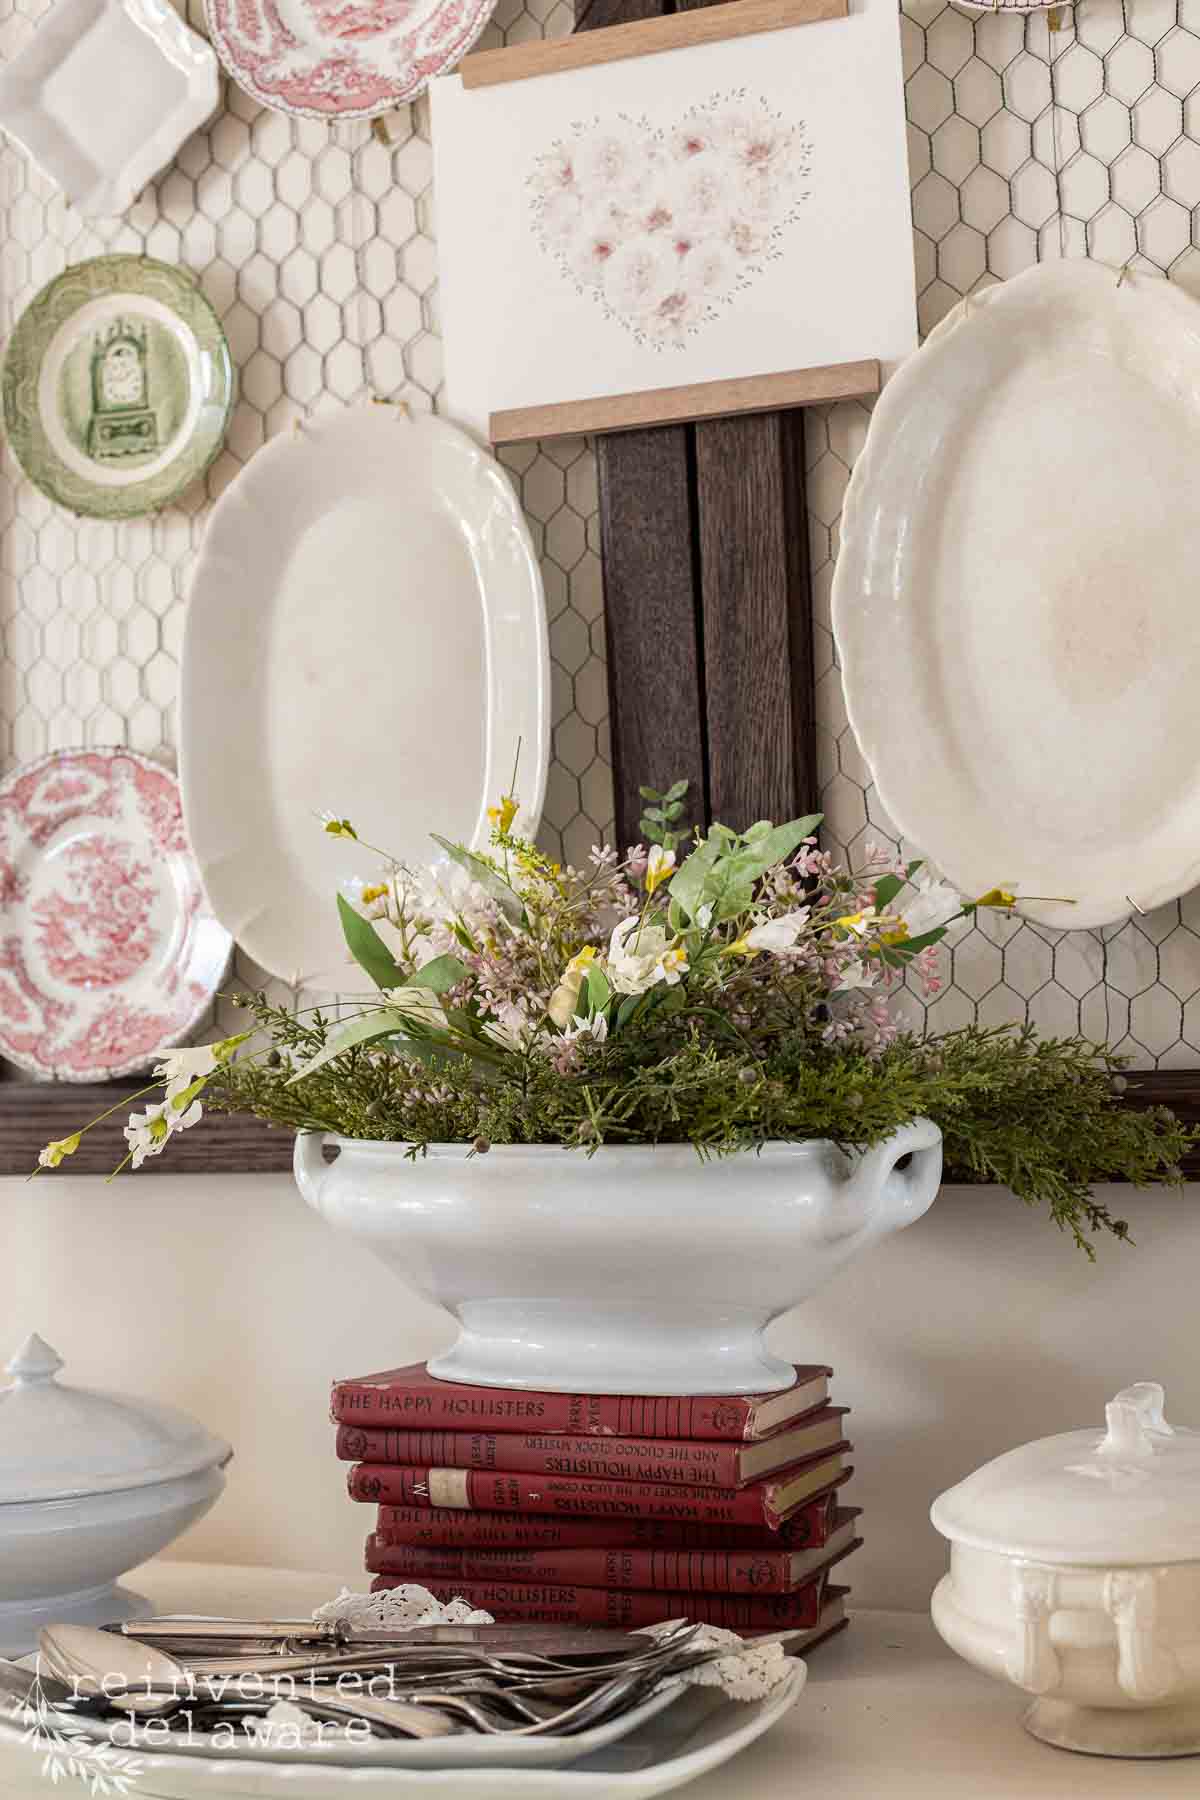 ironstone dishes hanging on a wall as decor and ironstone soup toureen with Valentine's Day floral arrangement